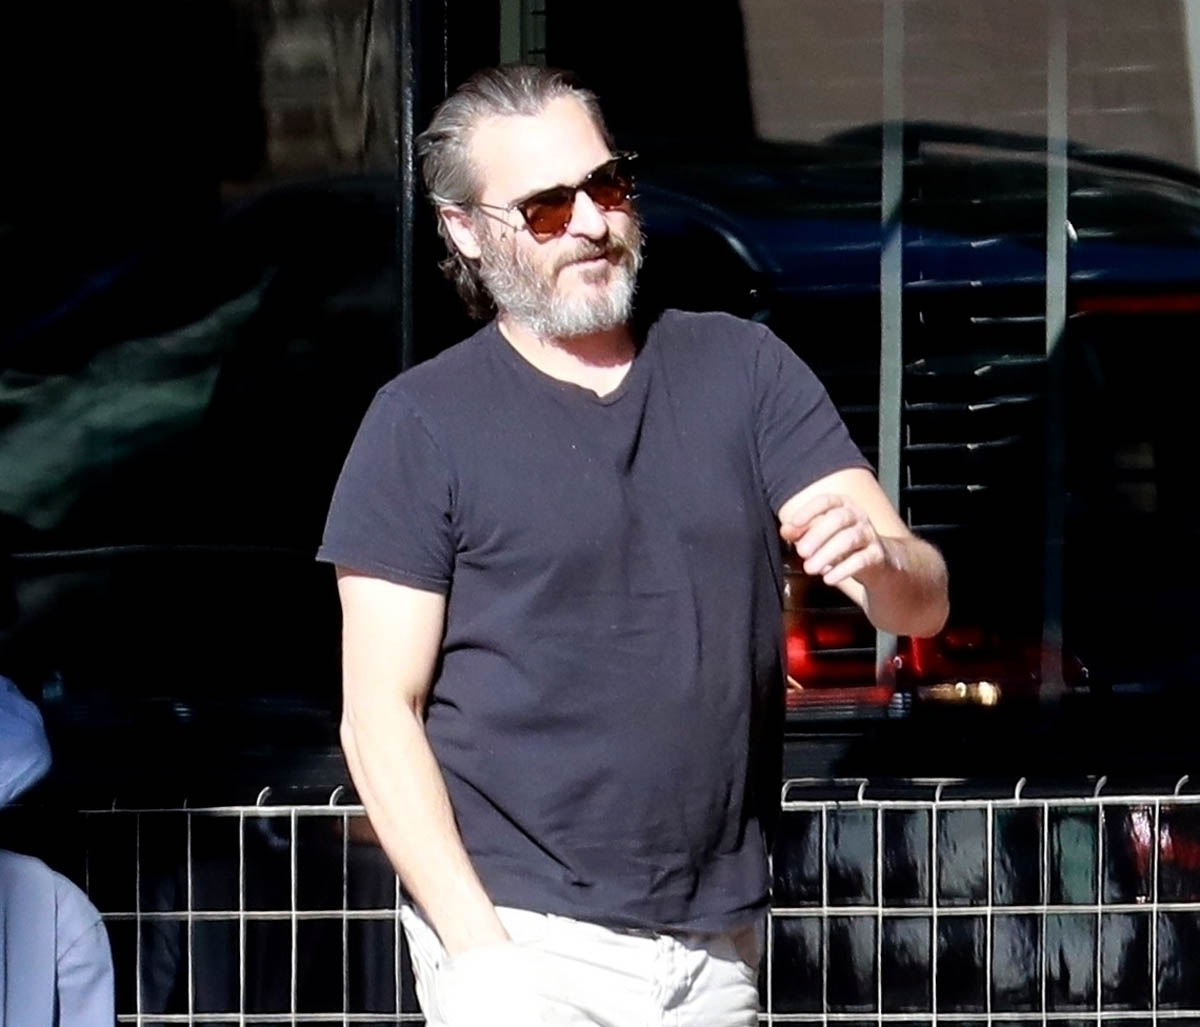 Joaquin Phoenix out in LA as it's reported he could be the next Joker in standalone movie